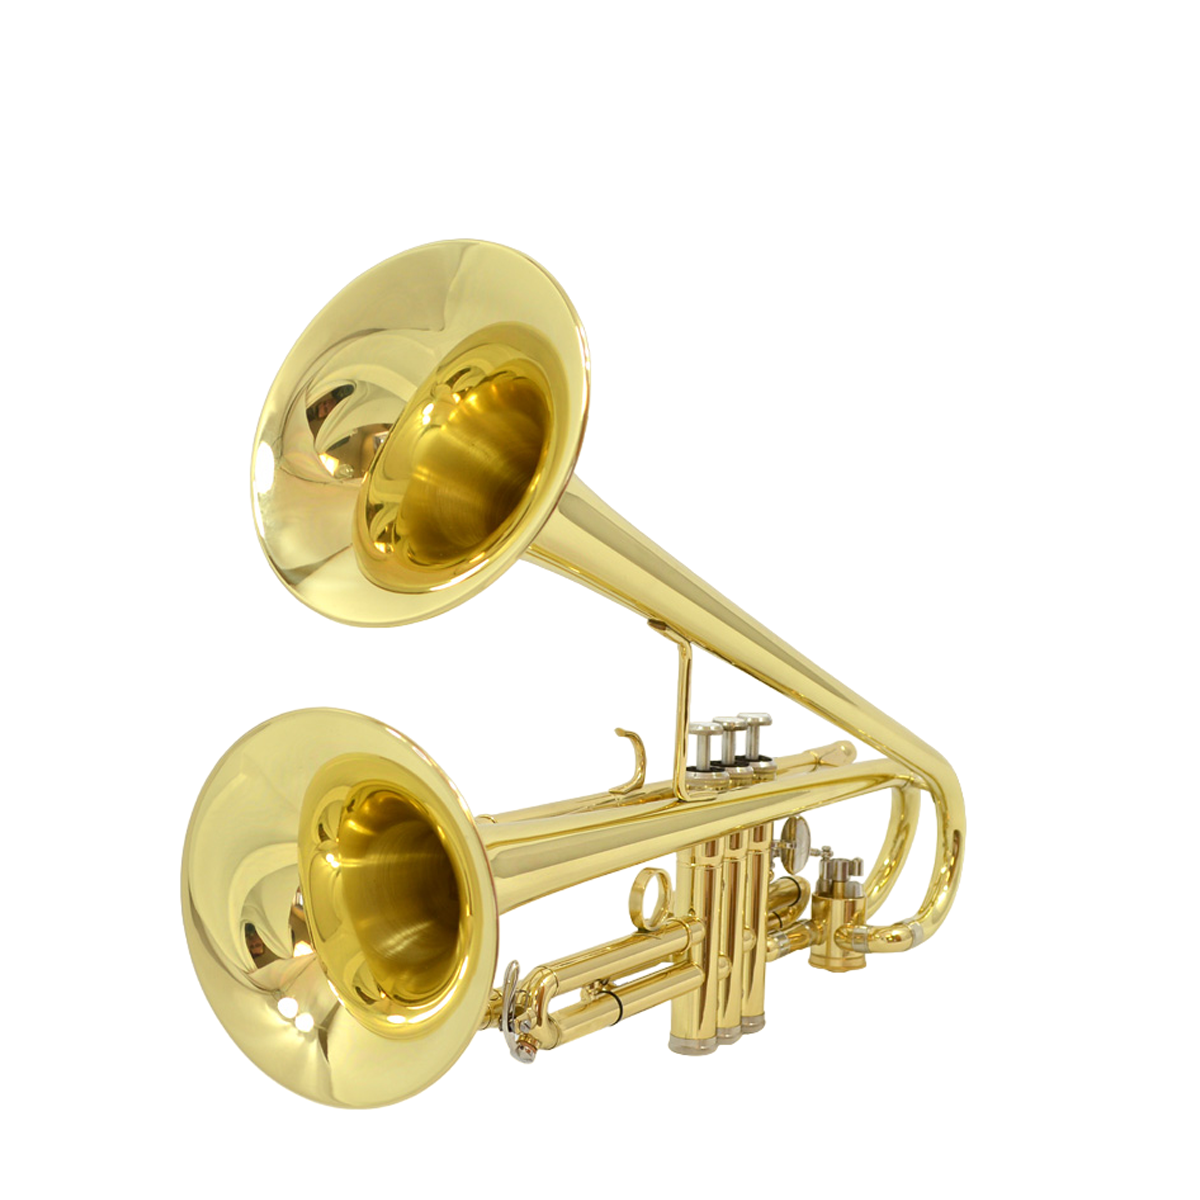 Bandleader Double Bell Trumpet